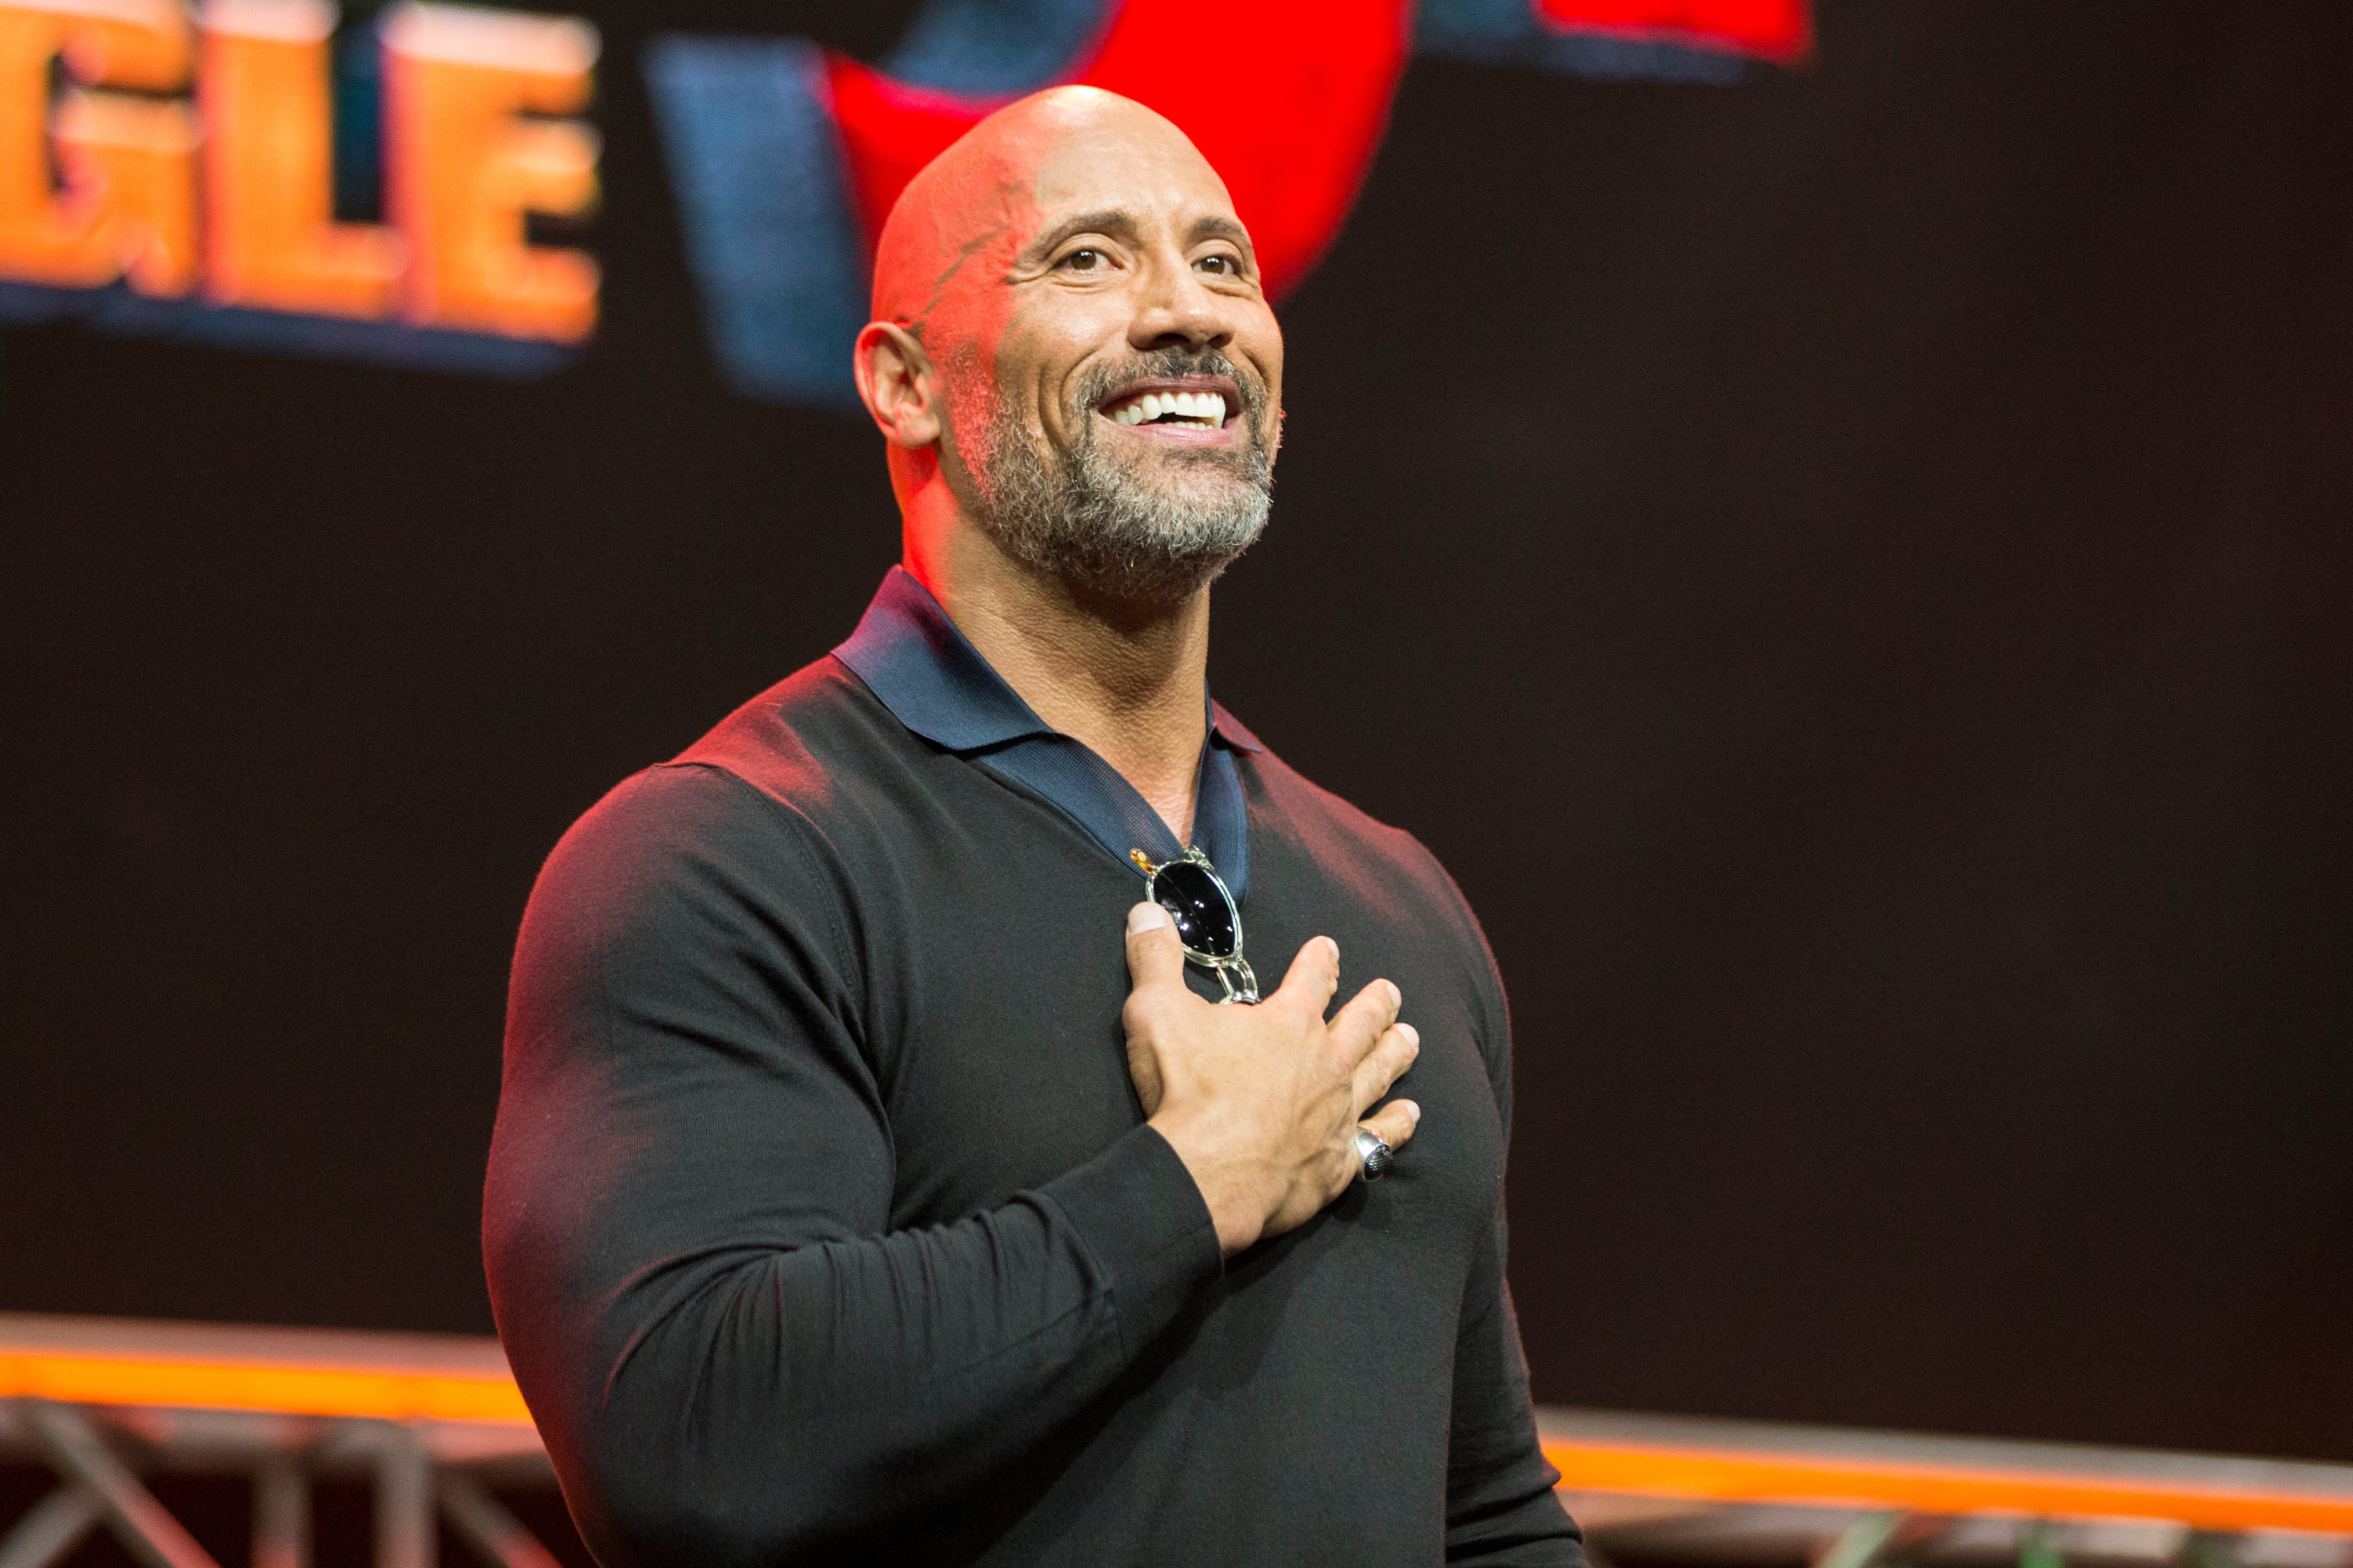 Dwayne ‘The Rock’ Johnson says he would run for president if ‘that’s what the people wanted’